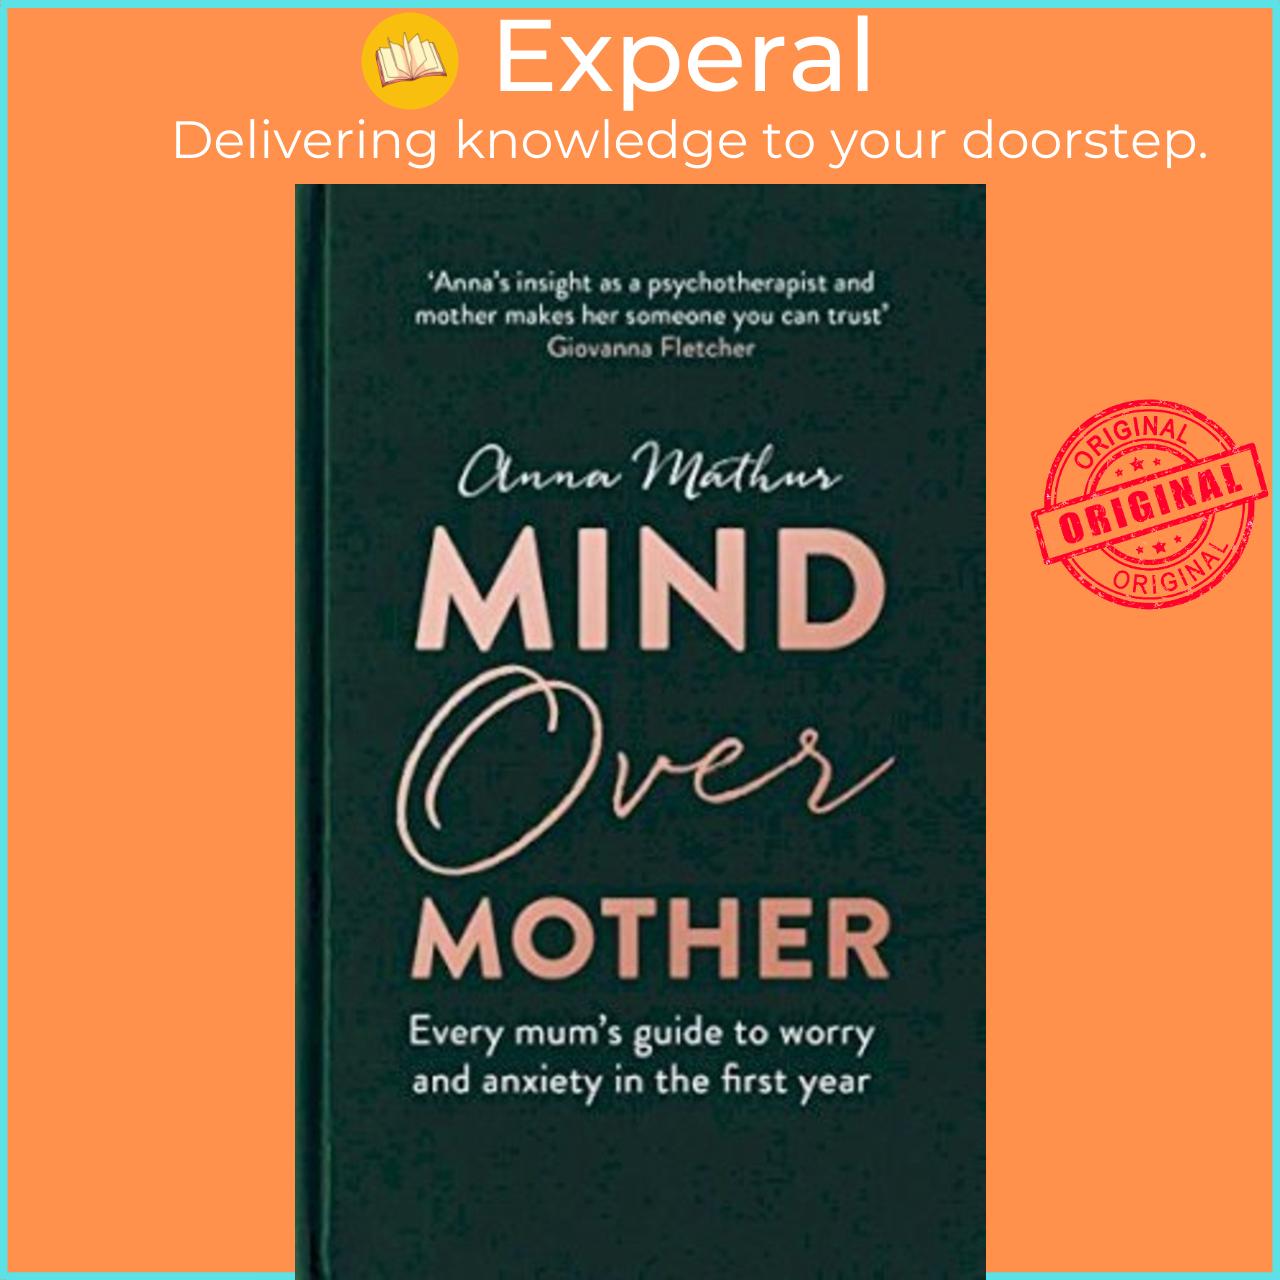 Sách - Mind Over Mother : Every mum's guide to worry and anxiety in the first yea by Anna Mathur (UK edition, hardcover)